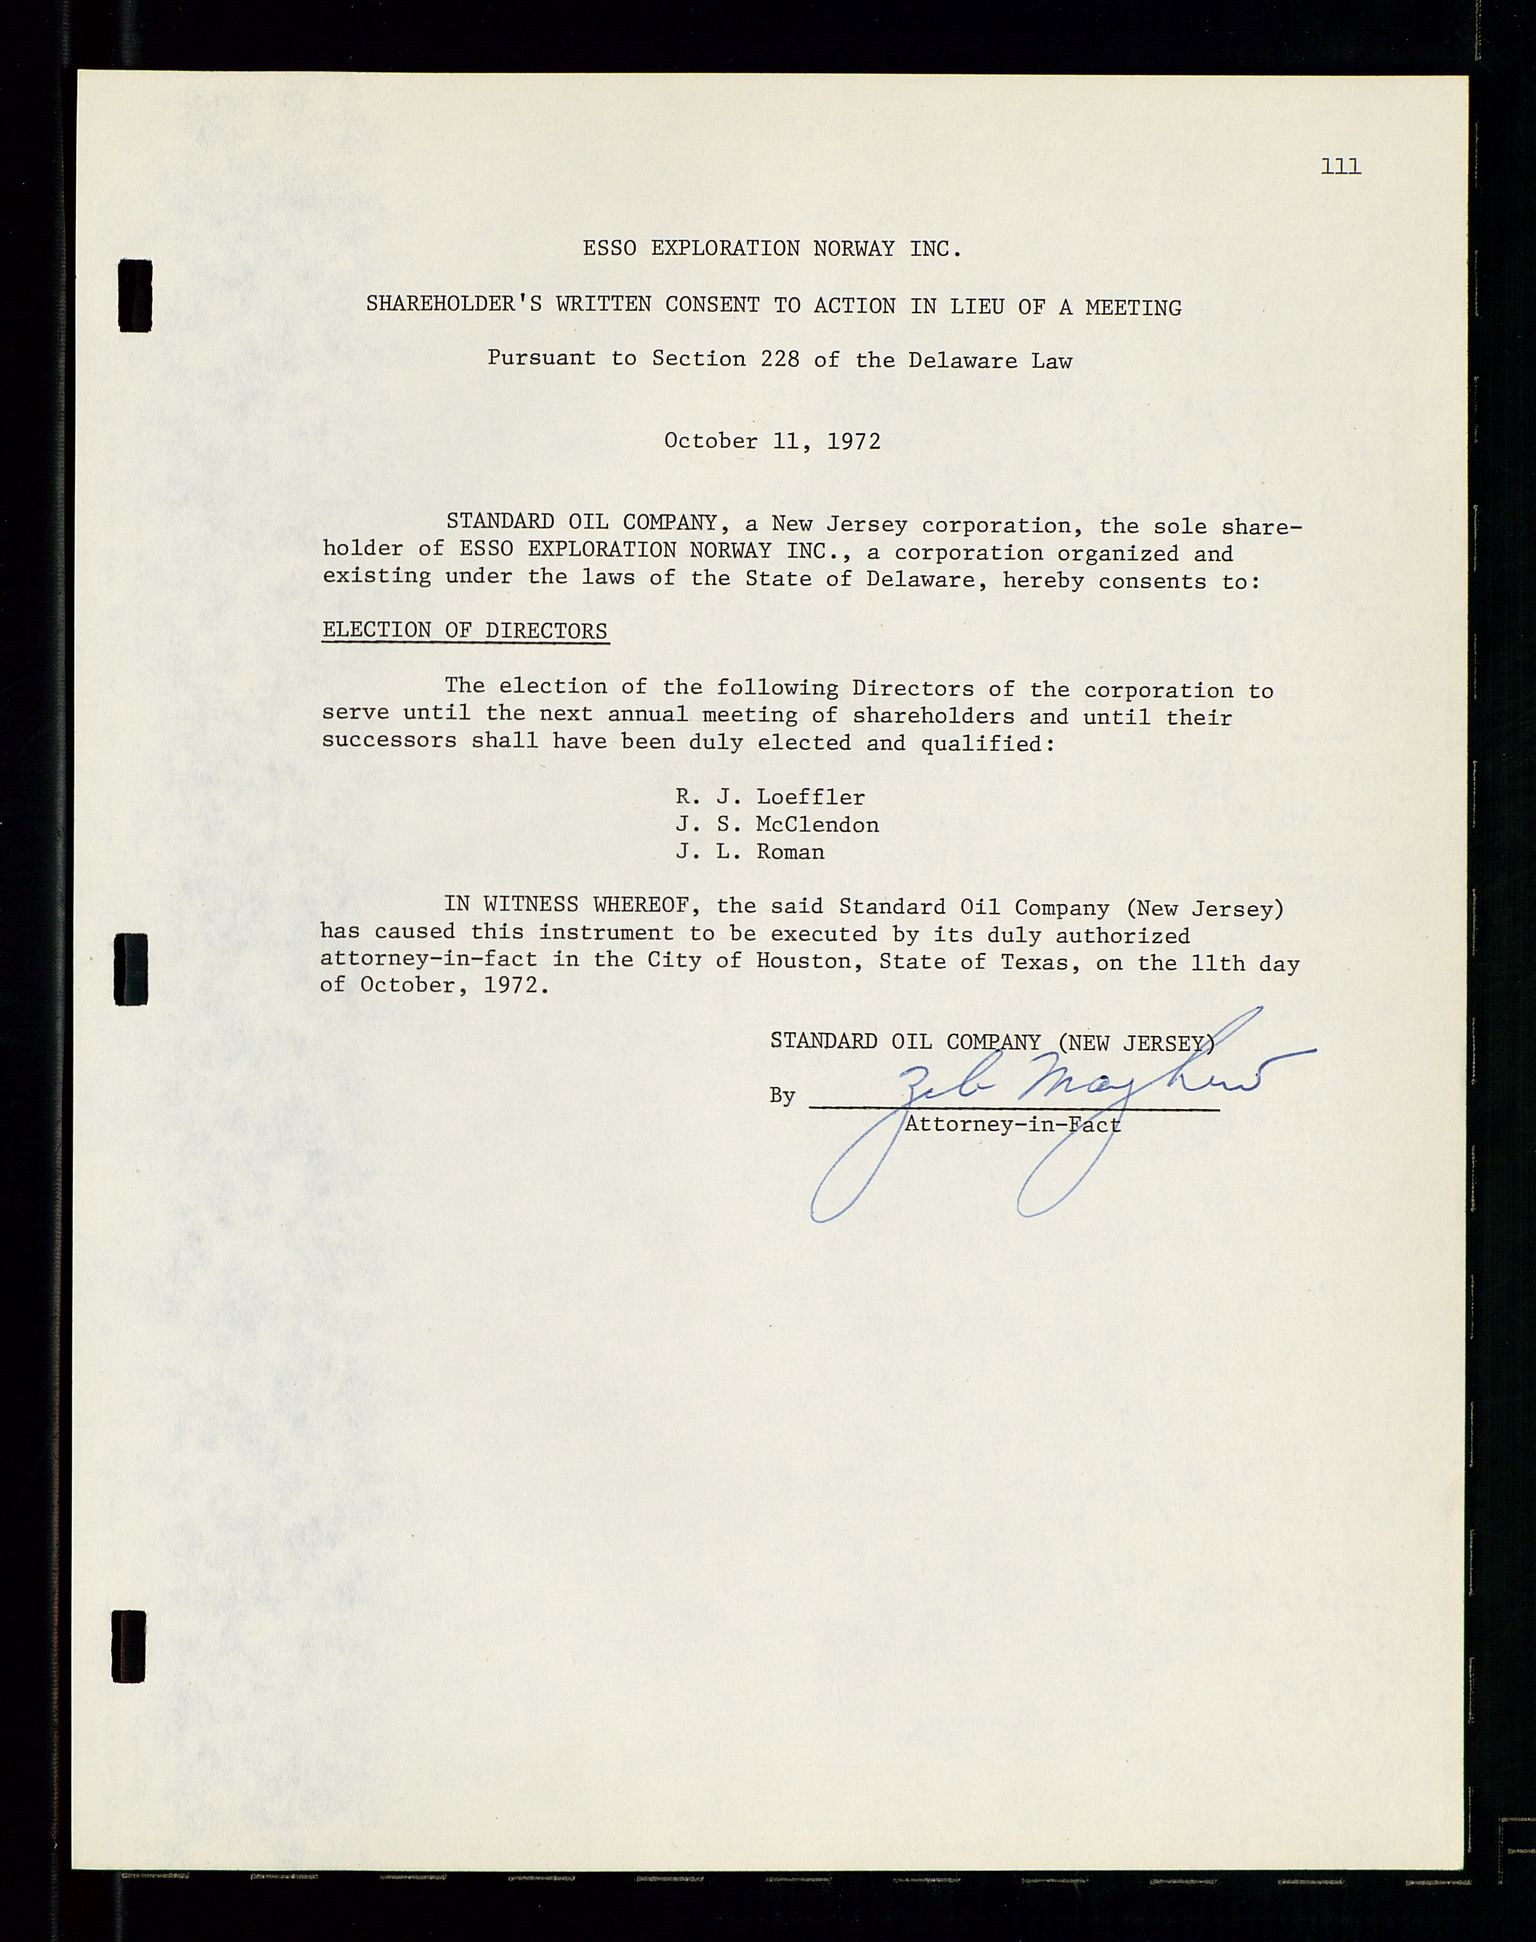 Pa 1512 - Esso Exploration and Production Norway Inc., SAST/A-101917/A/Aa/L0001/0001: Styredokumenter / Corporate records, By-Laws, Board meeting minutes, Incorporations, 1965-1975, s. 111